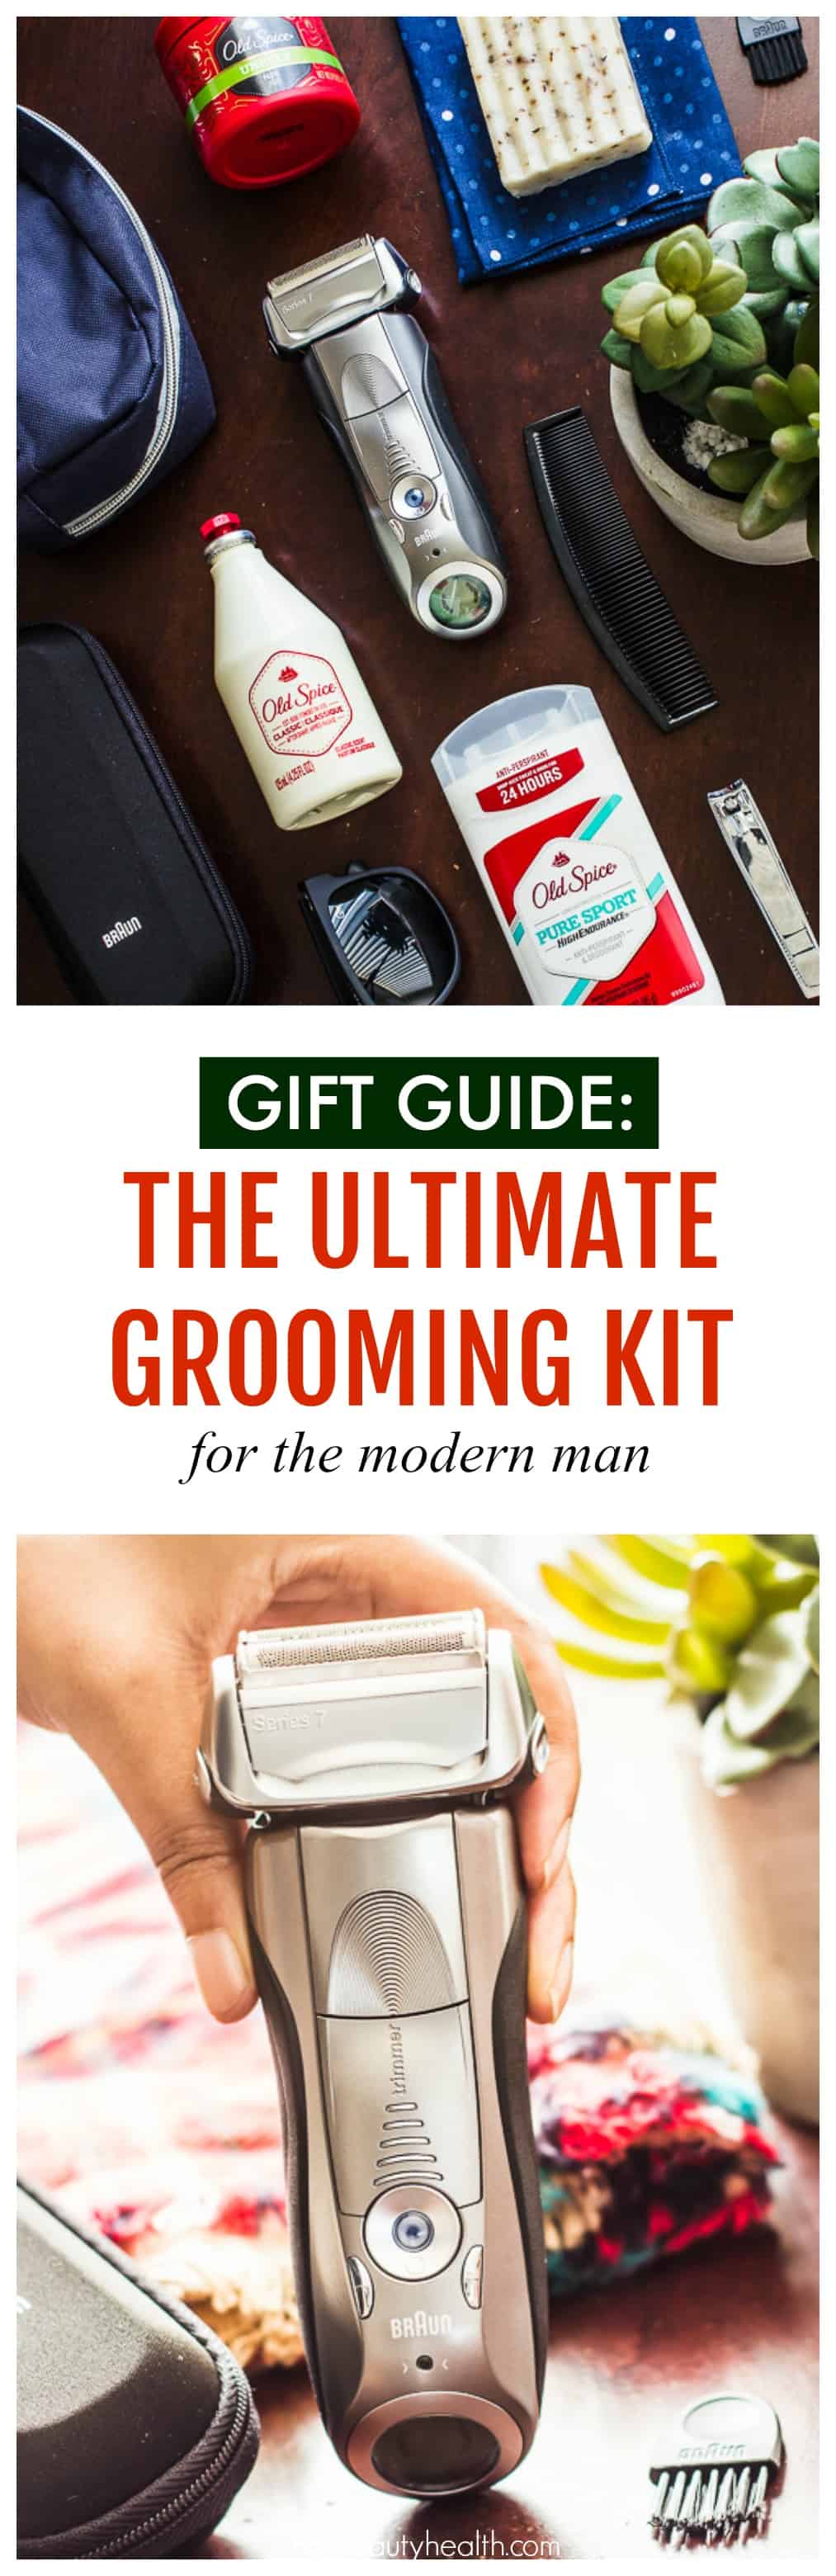 Gift for Him: The Ultimate Grooming Kit for The Modern Man. Electric shavers are becoming man’s best friend, and giving them as a Christmas gift for your husband, dad, or brother this holiday season is the best idea you can have.